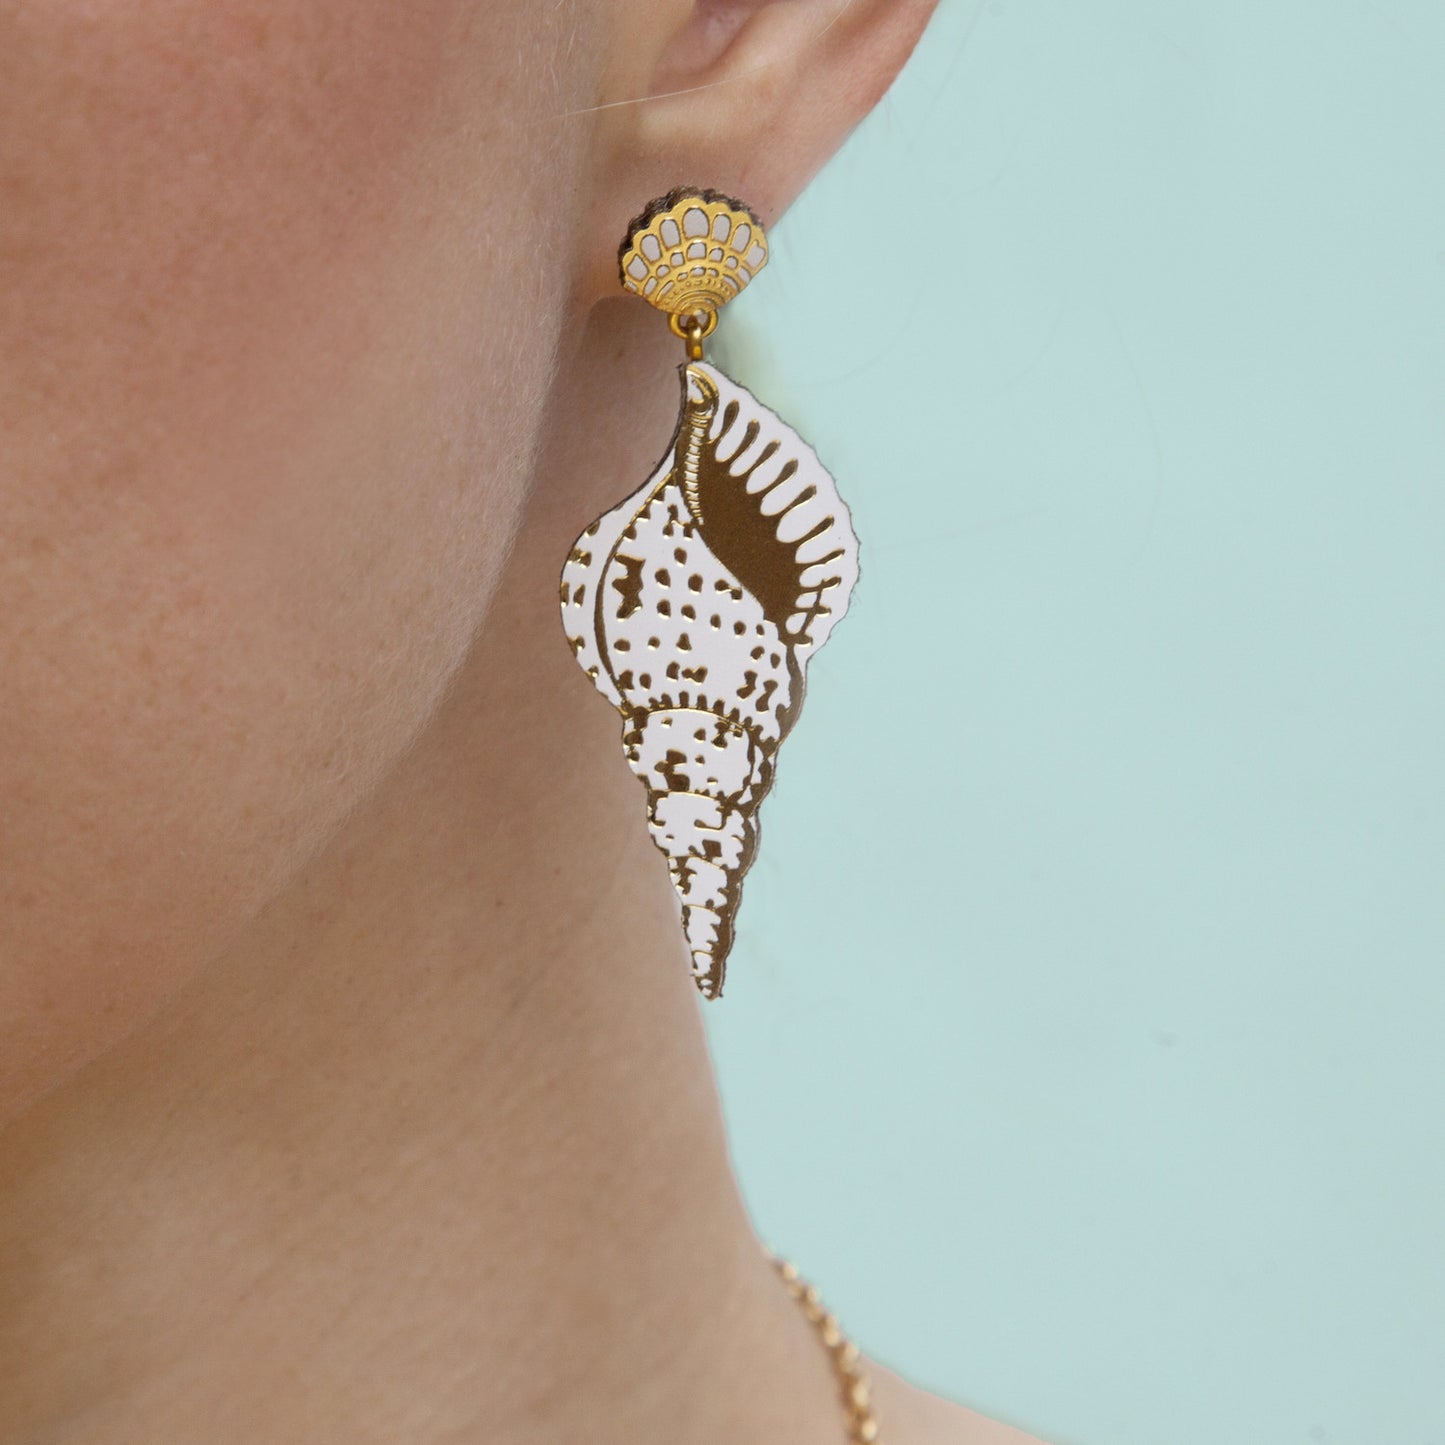 pointy conch shell leather stud earrings in white & gold on model's ear